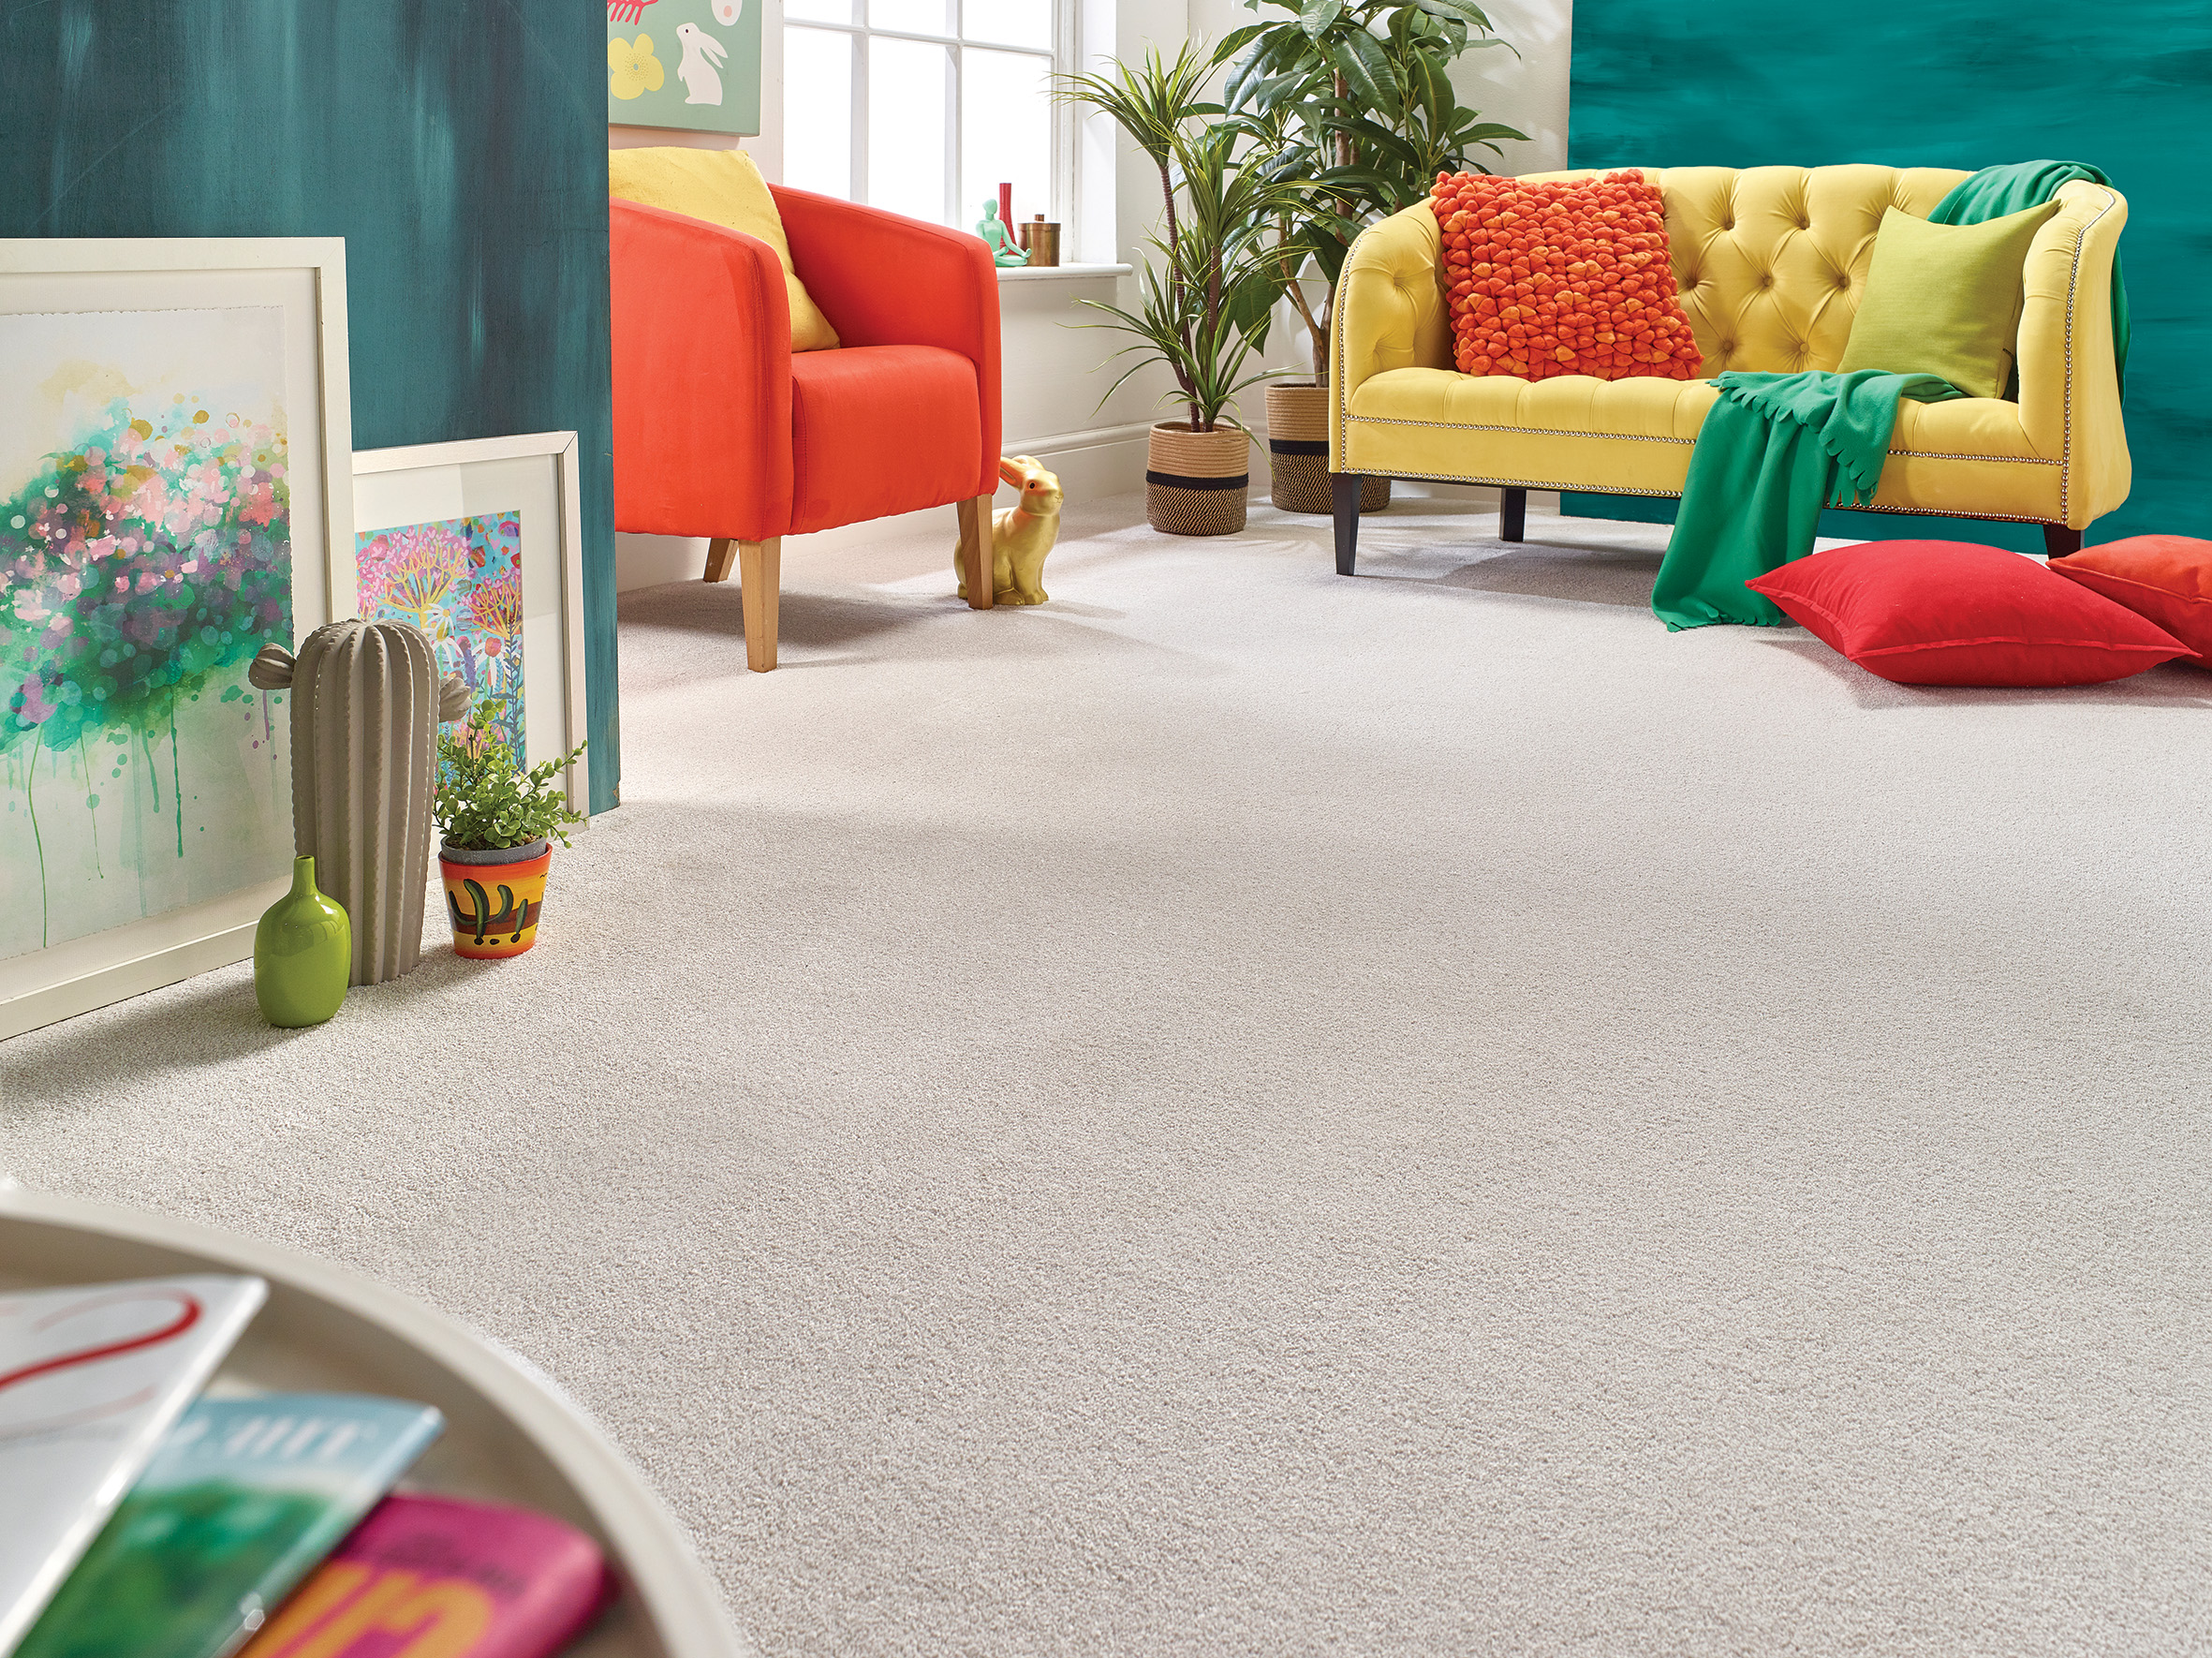 Festival is the new Stainfree carpet by Abingdon Flooring